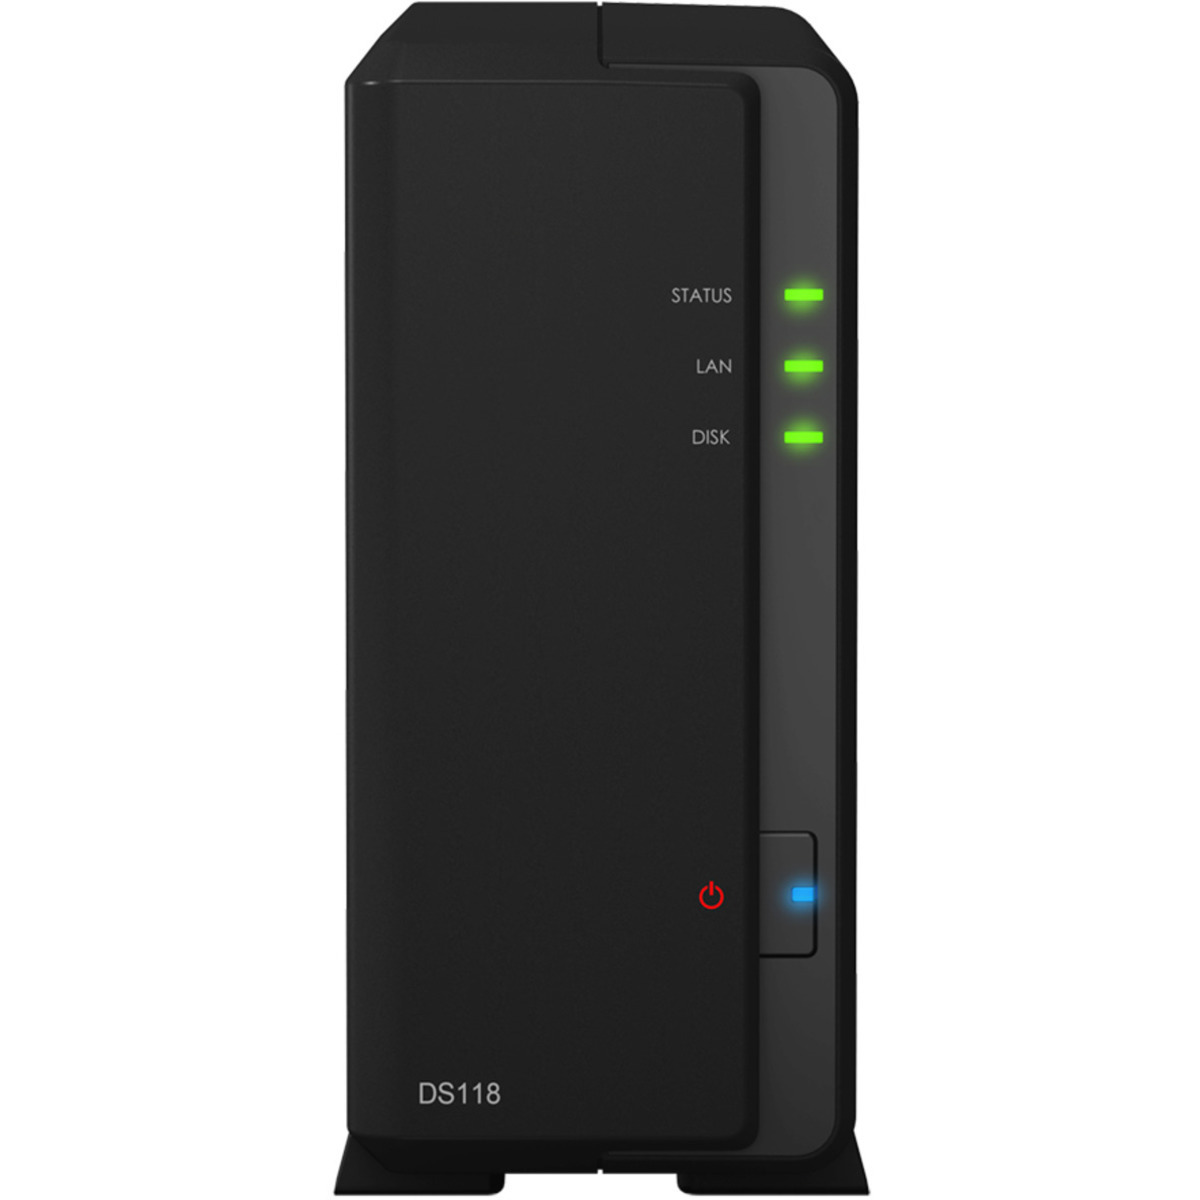 buy $484 Synology DiskStation DS118 8tb Desktop NAS - Network Attached Storage Device 1x8000gb Western Digital Ultrastar DC HC320 HUS728T8TALE6L4 3.5 7200rpm SATA 6Gb/s HDD ENTERPRISE Class Drives Installed - Burn-In Tested - nas headquarters buy network attached storage server device das new raid-5 free shipping usa christmas new year holiday sale DiskStation DS118